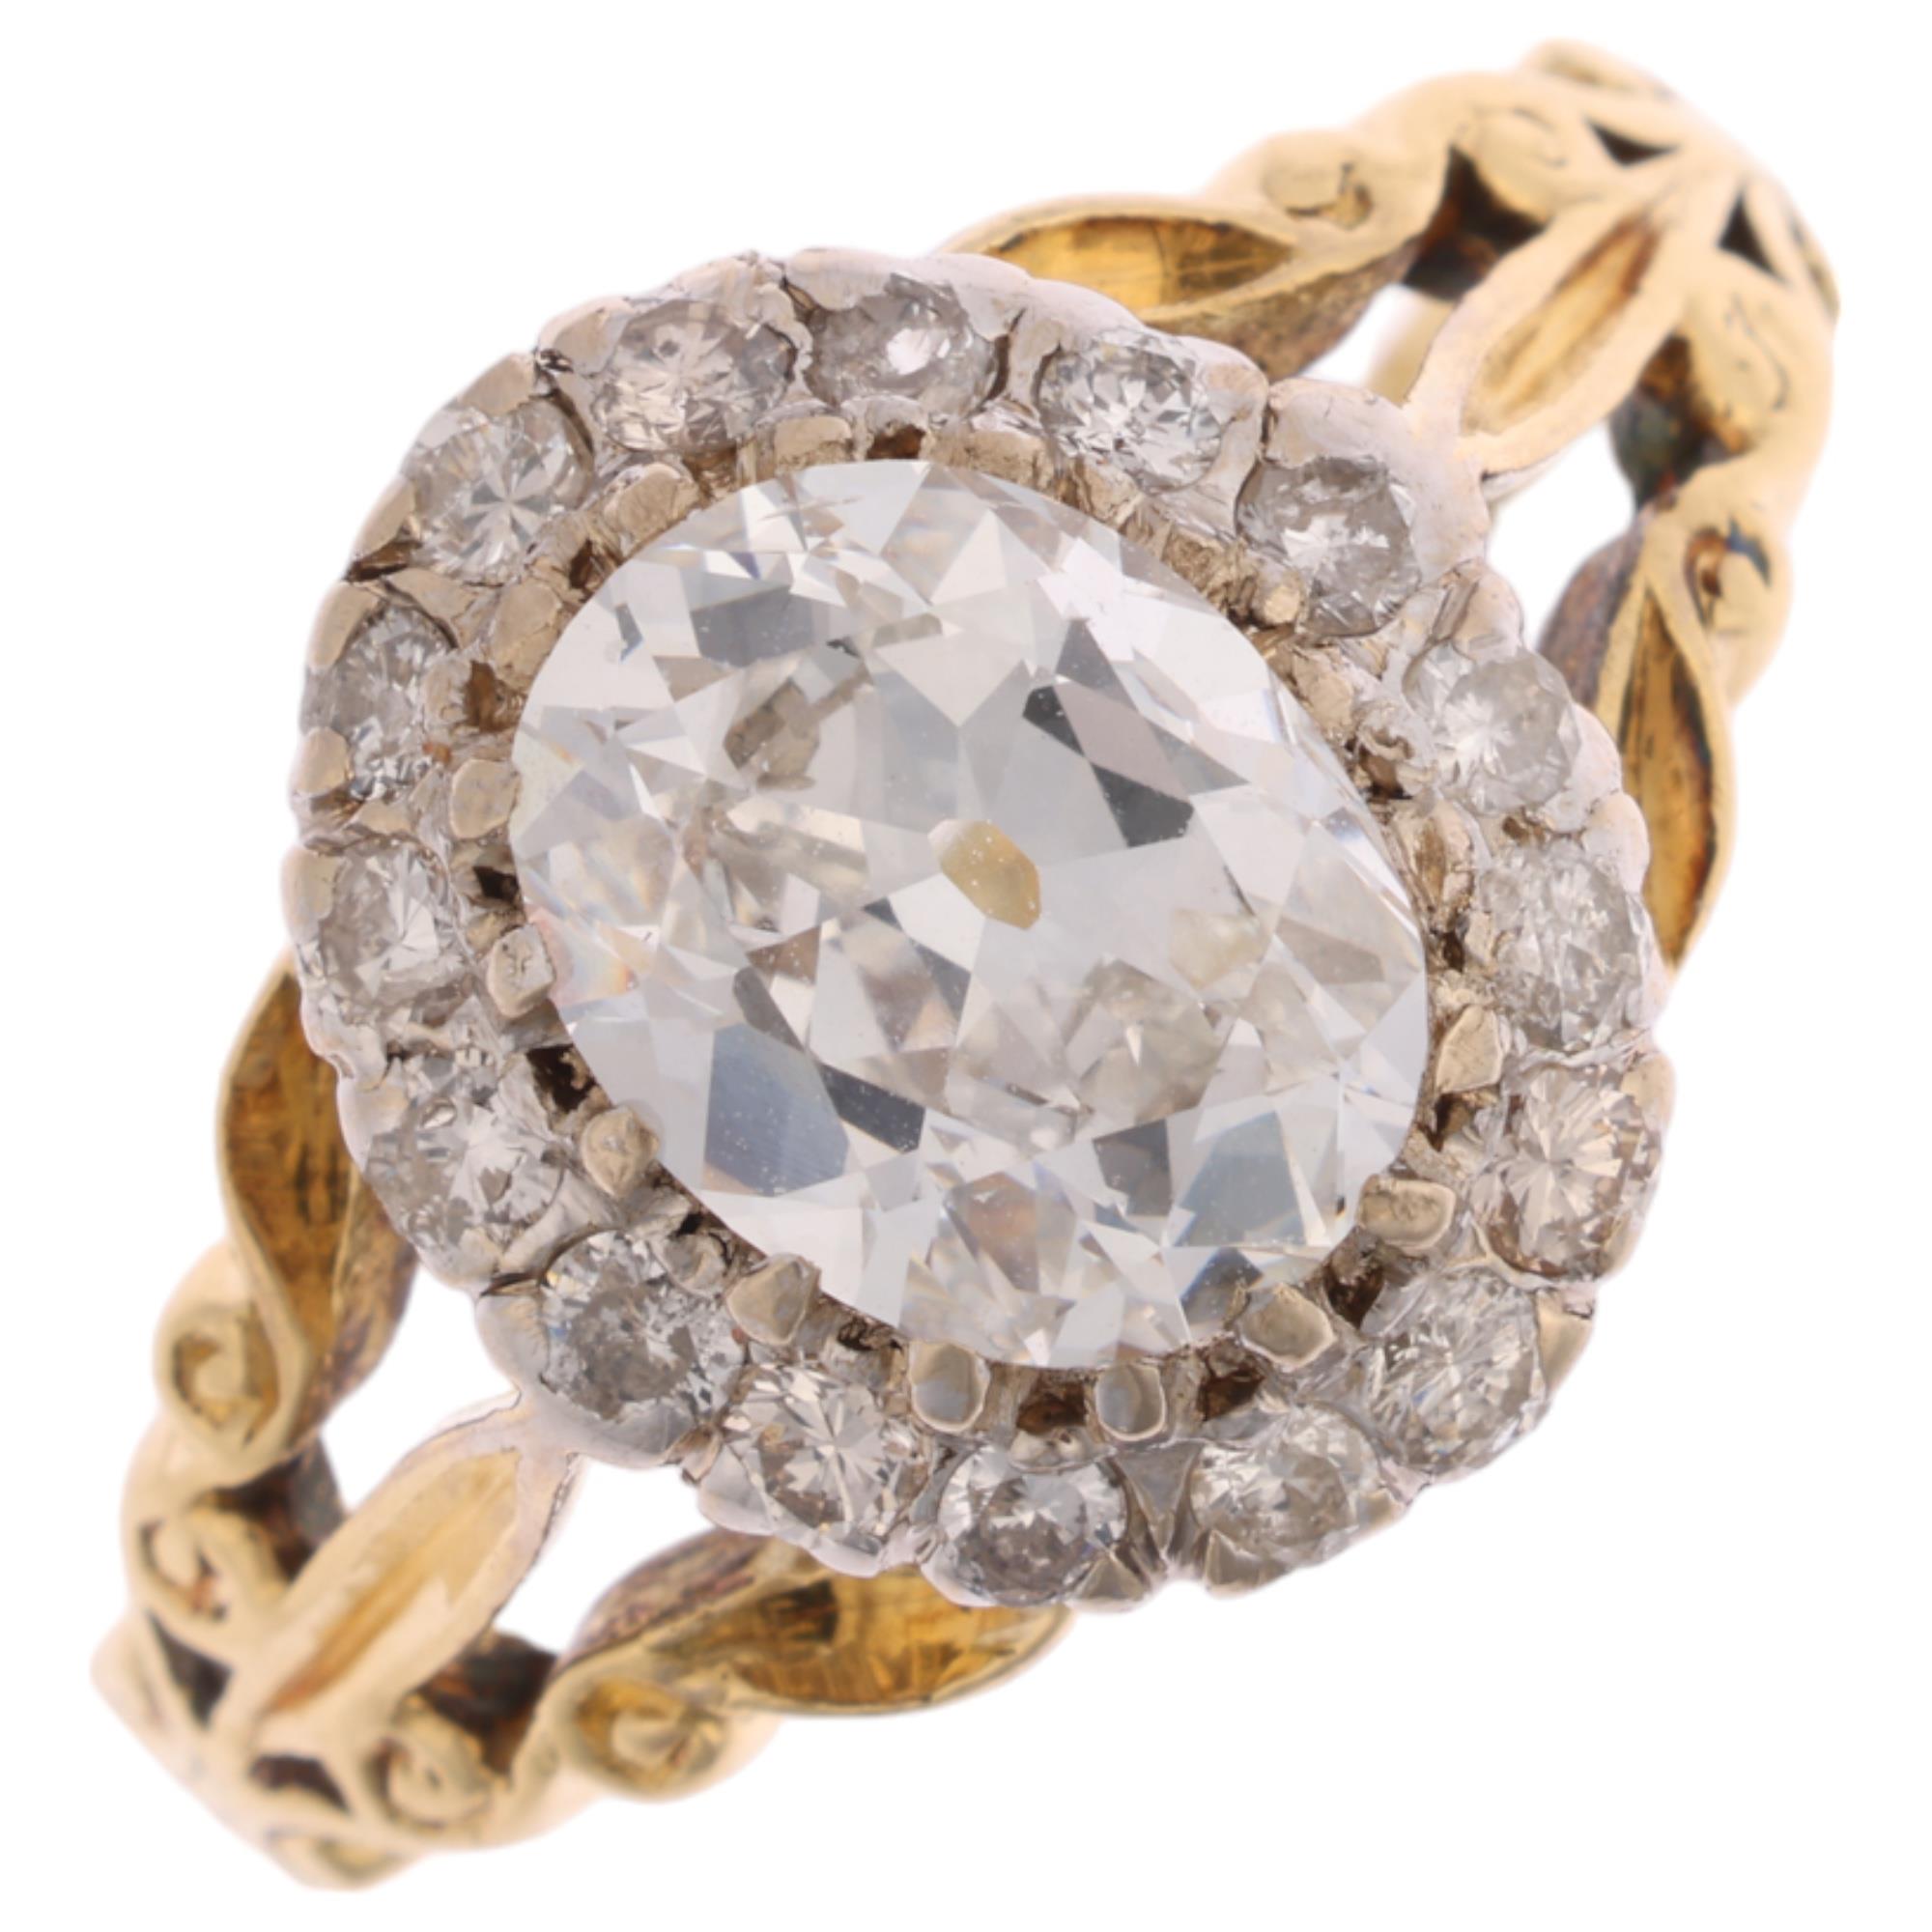 An 18ct gold 1.35ct lab grown diamond cluster ring, centrally claw set with 1.3ct oval mixed-cut lab